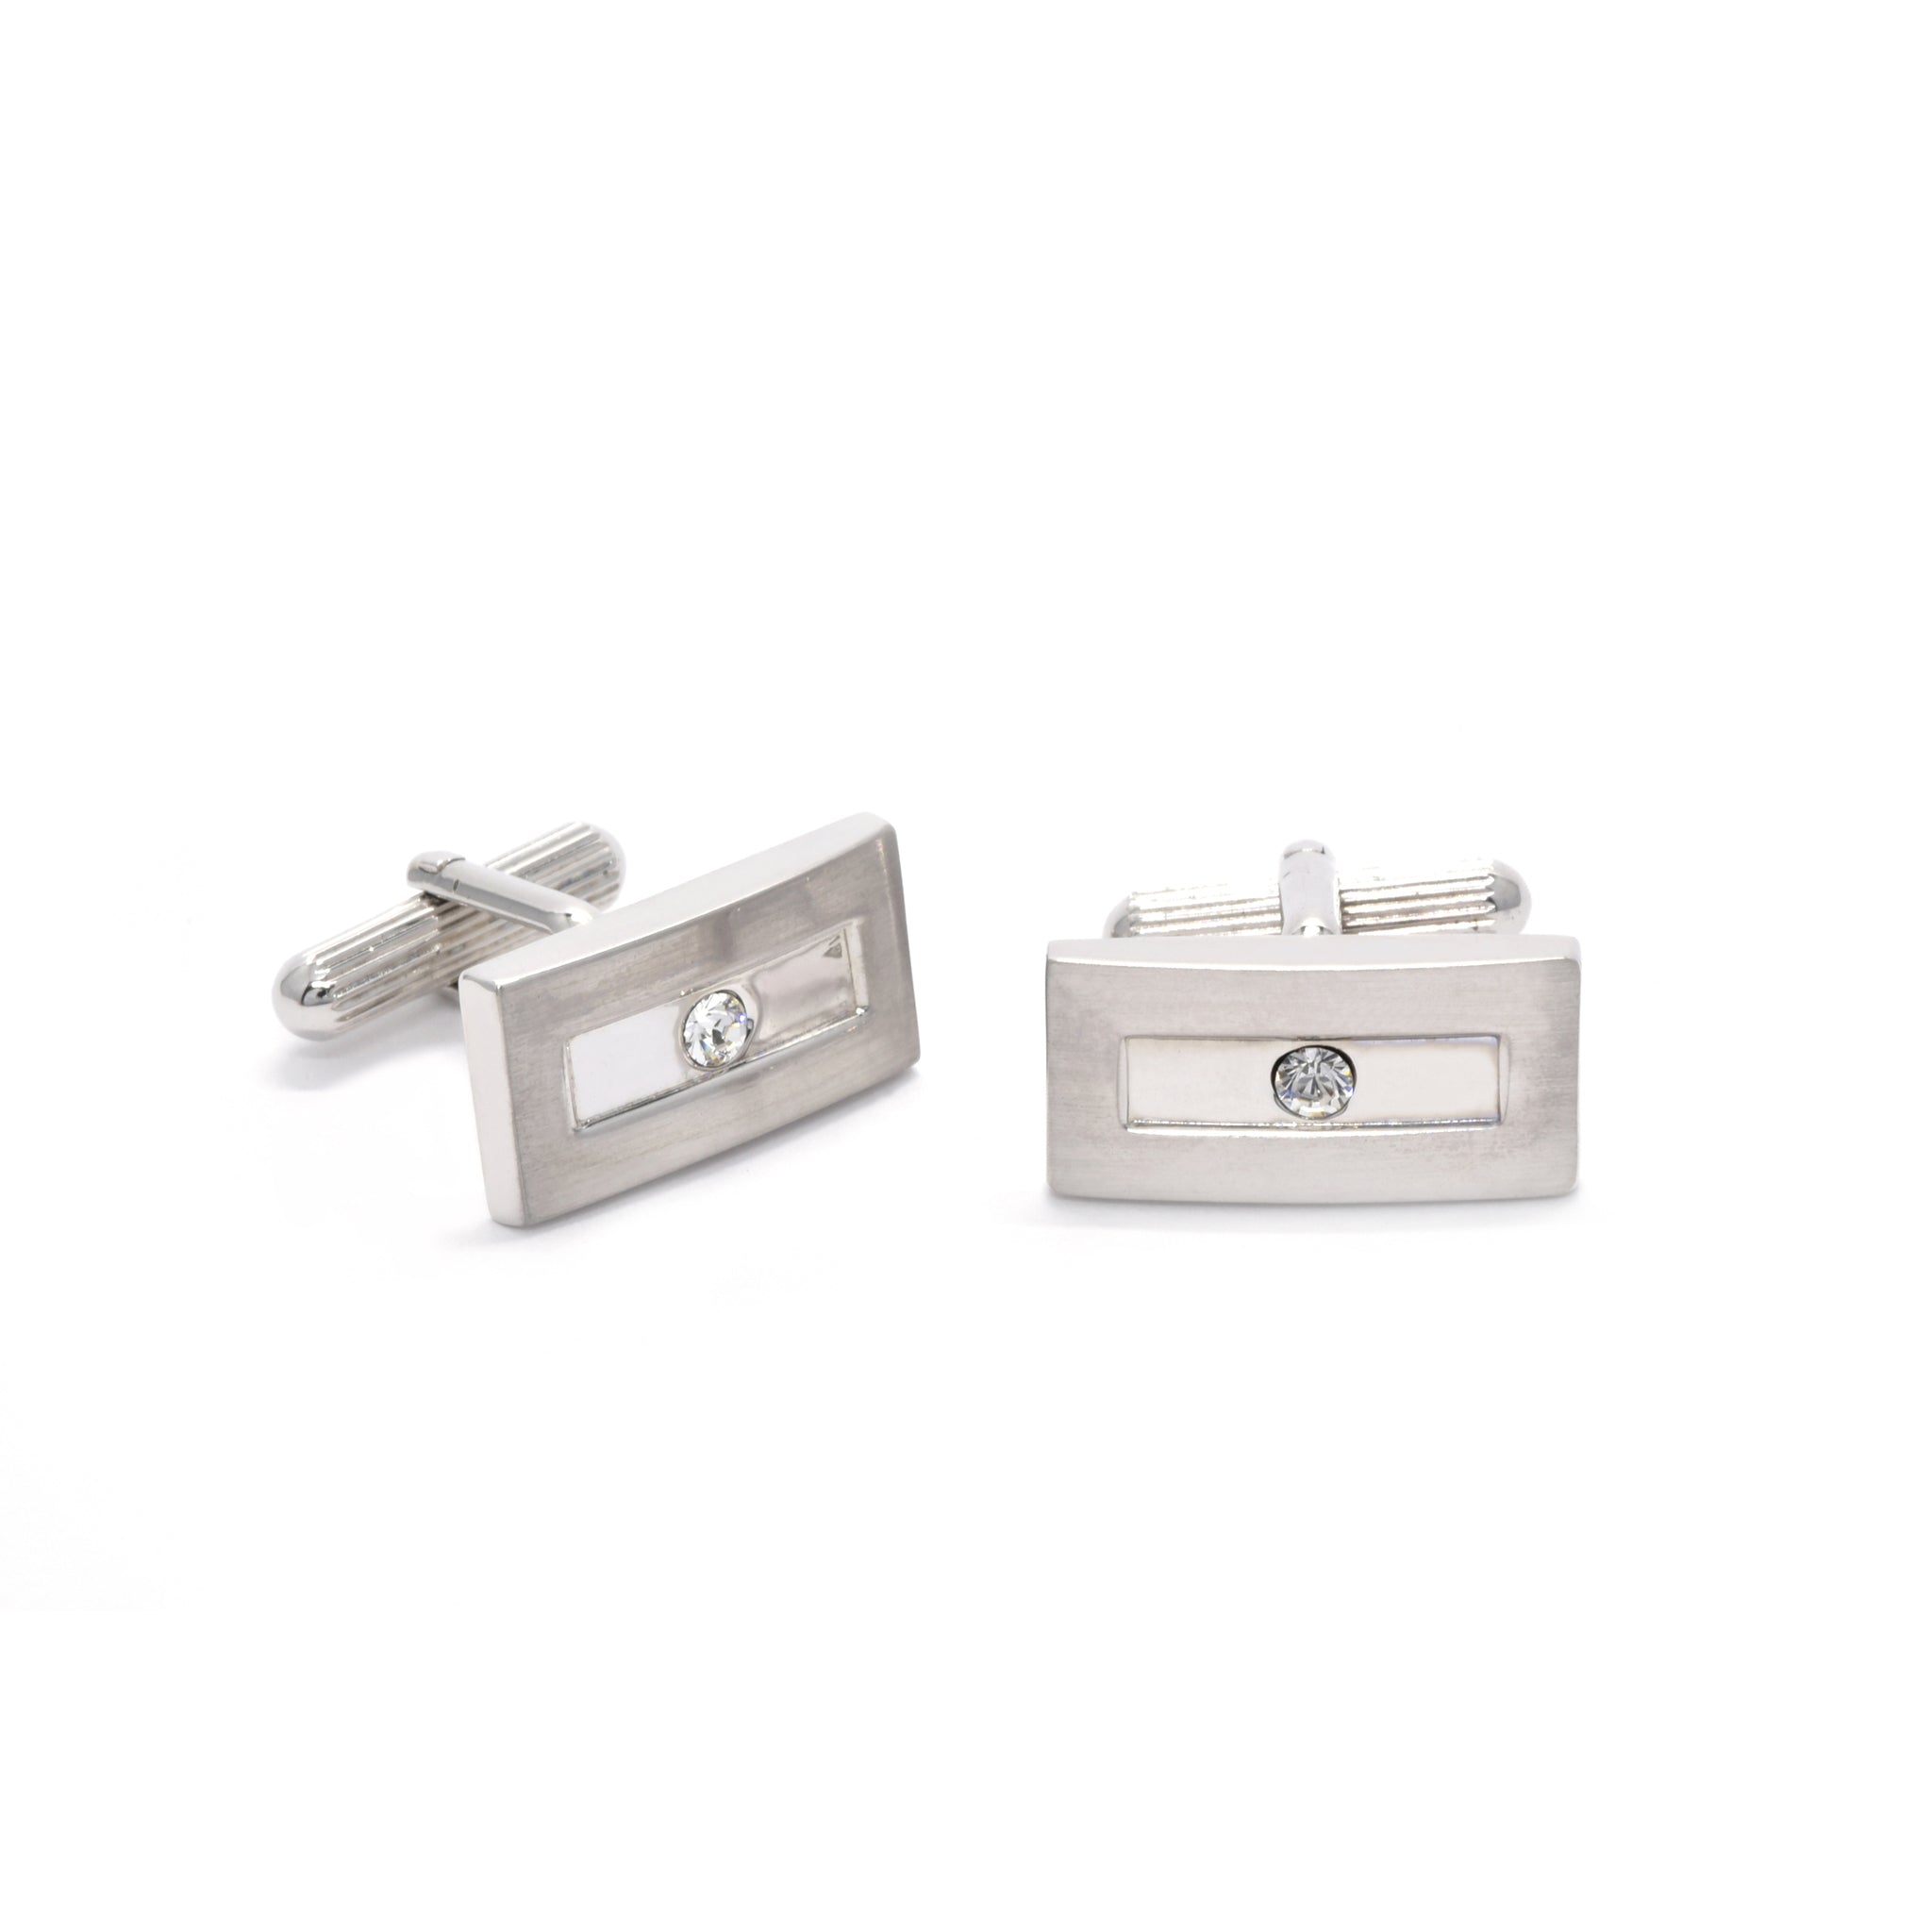 Jeremiah Cufflinks with Clear Crystal - Giorgio Mandelli® Official Site | GIORGIO MANDELLI Made in Italy